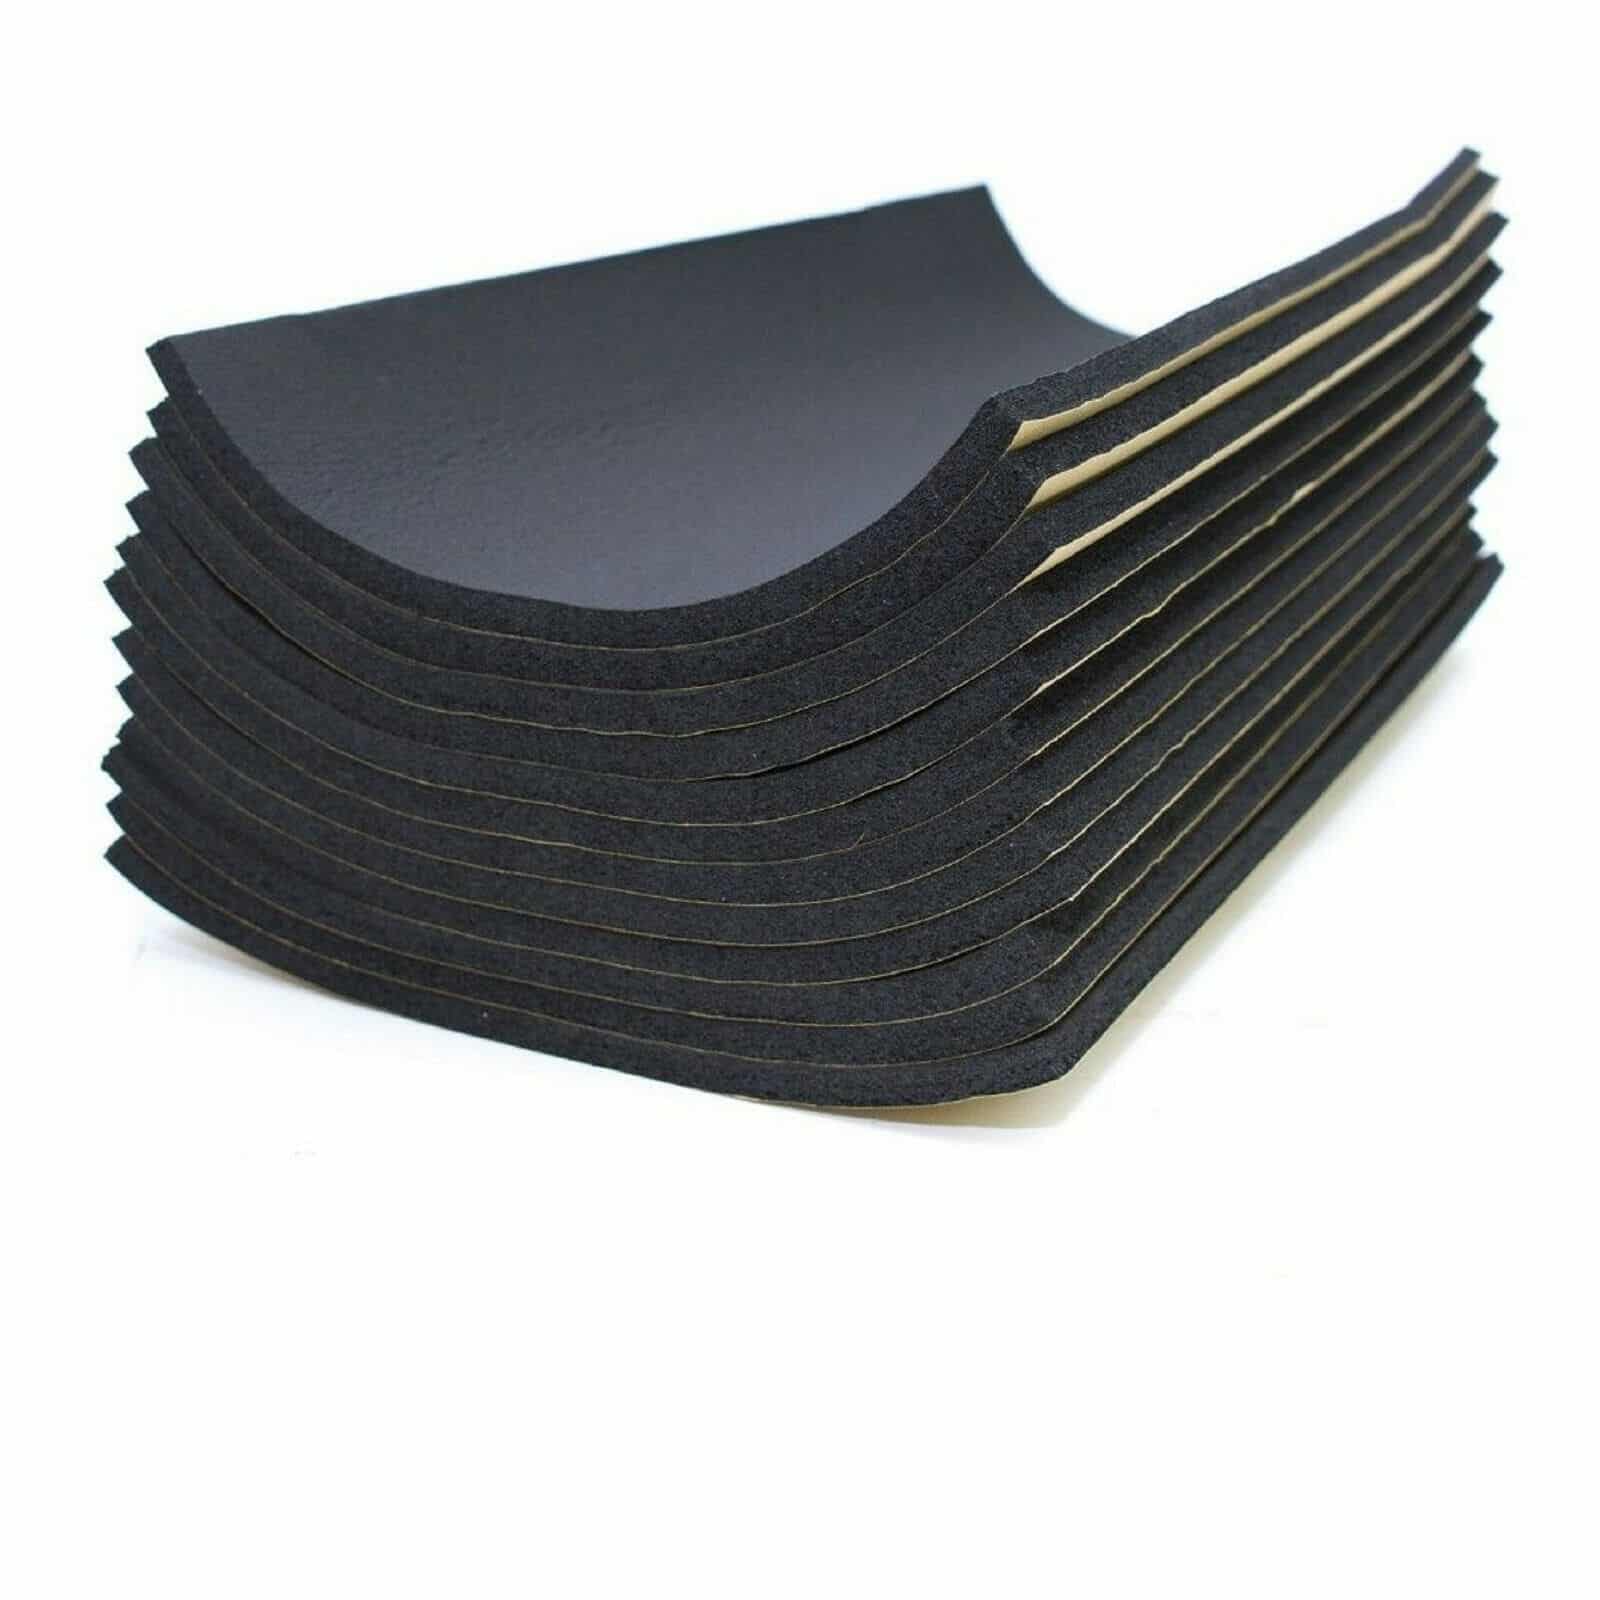 10 Sheets of Self Adhesive Sound Deadening Pads